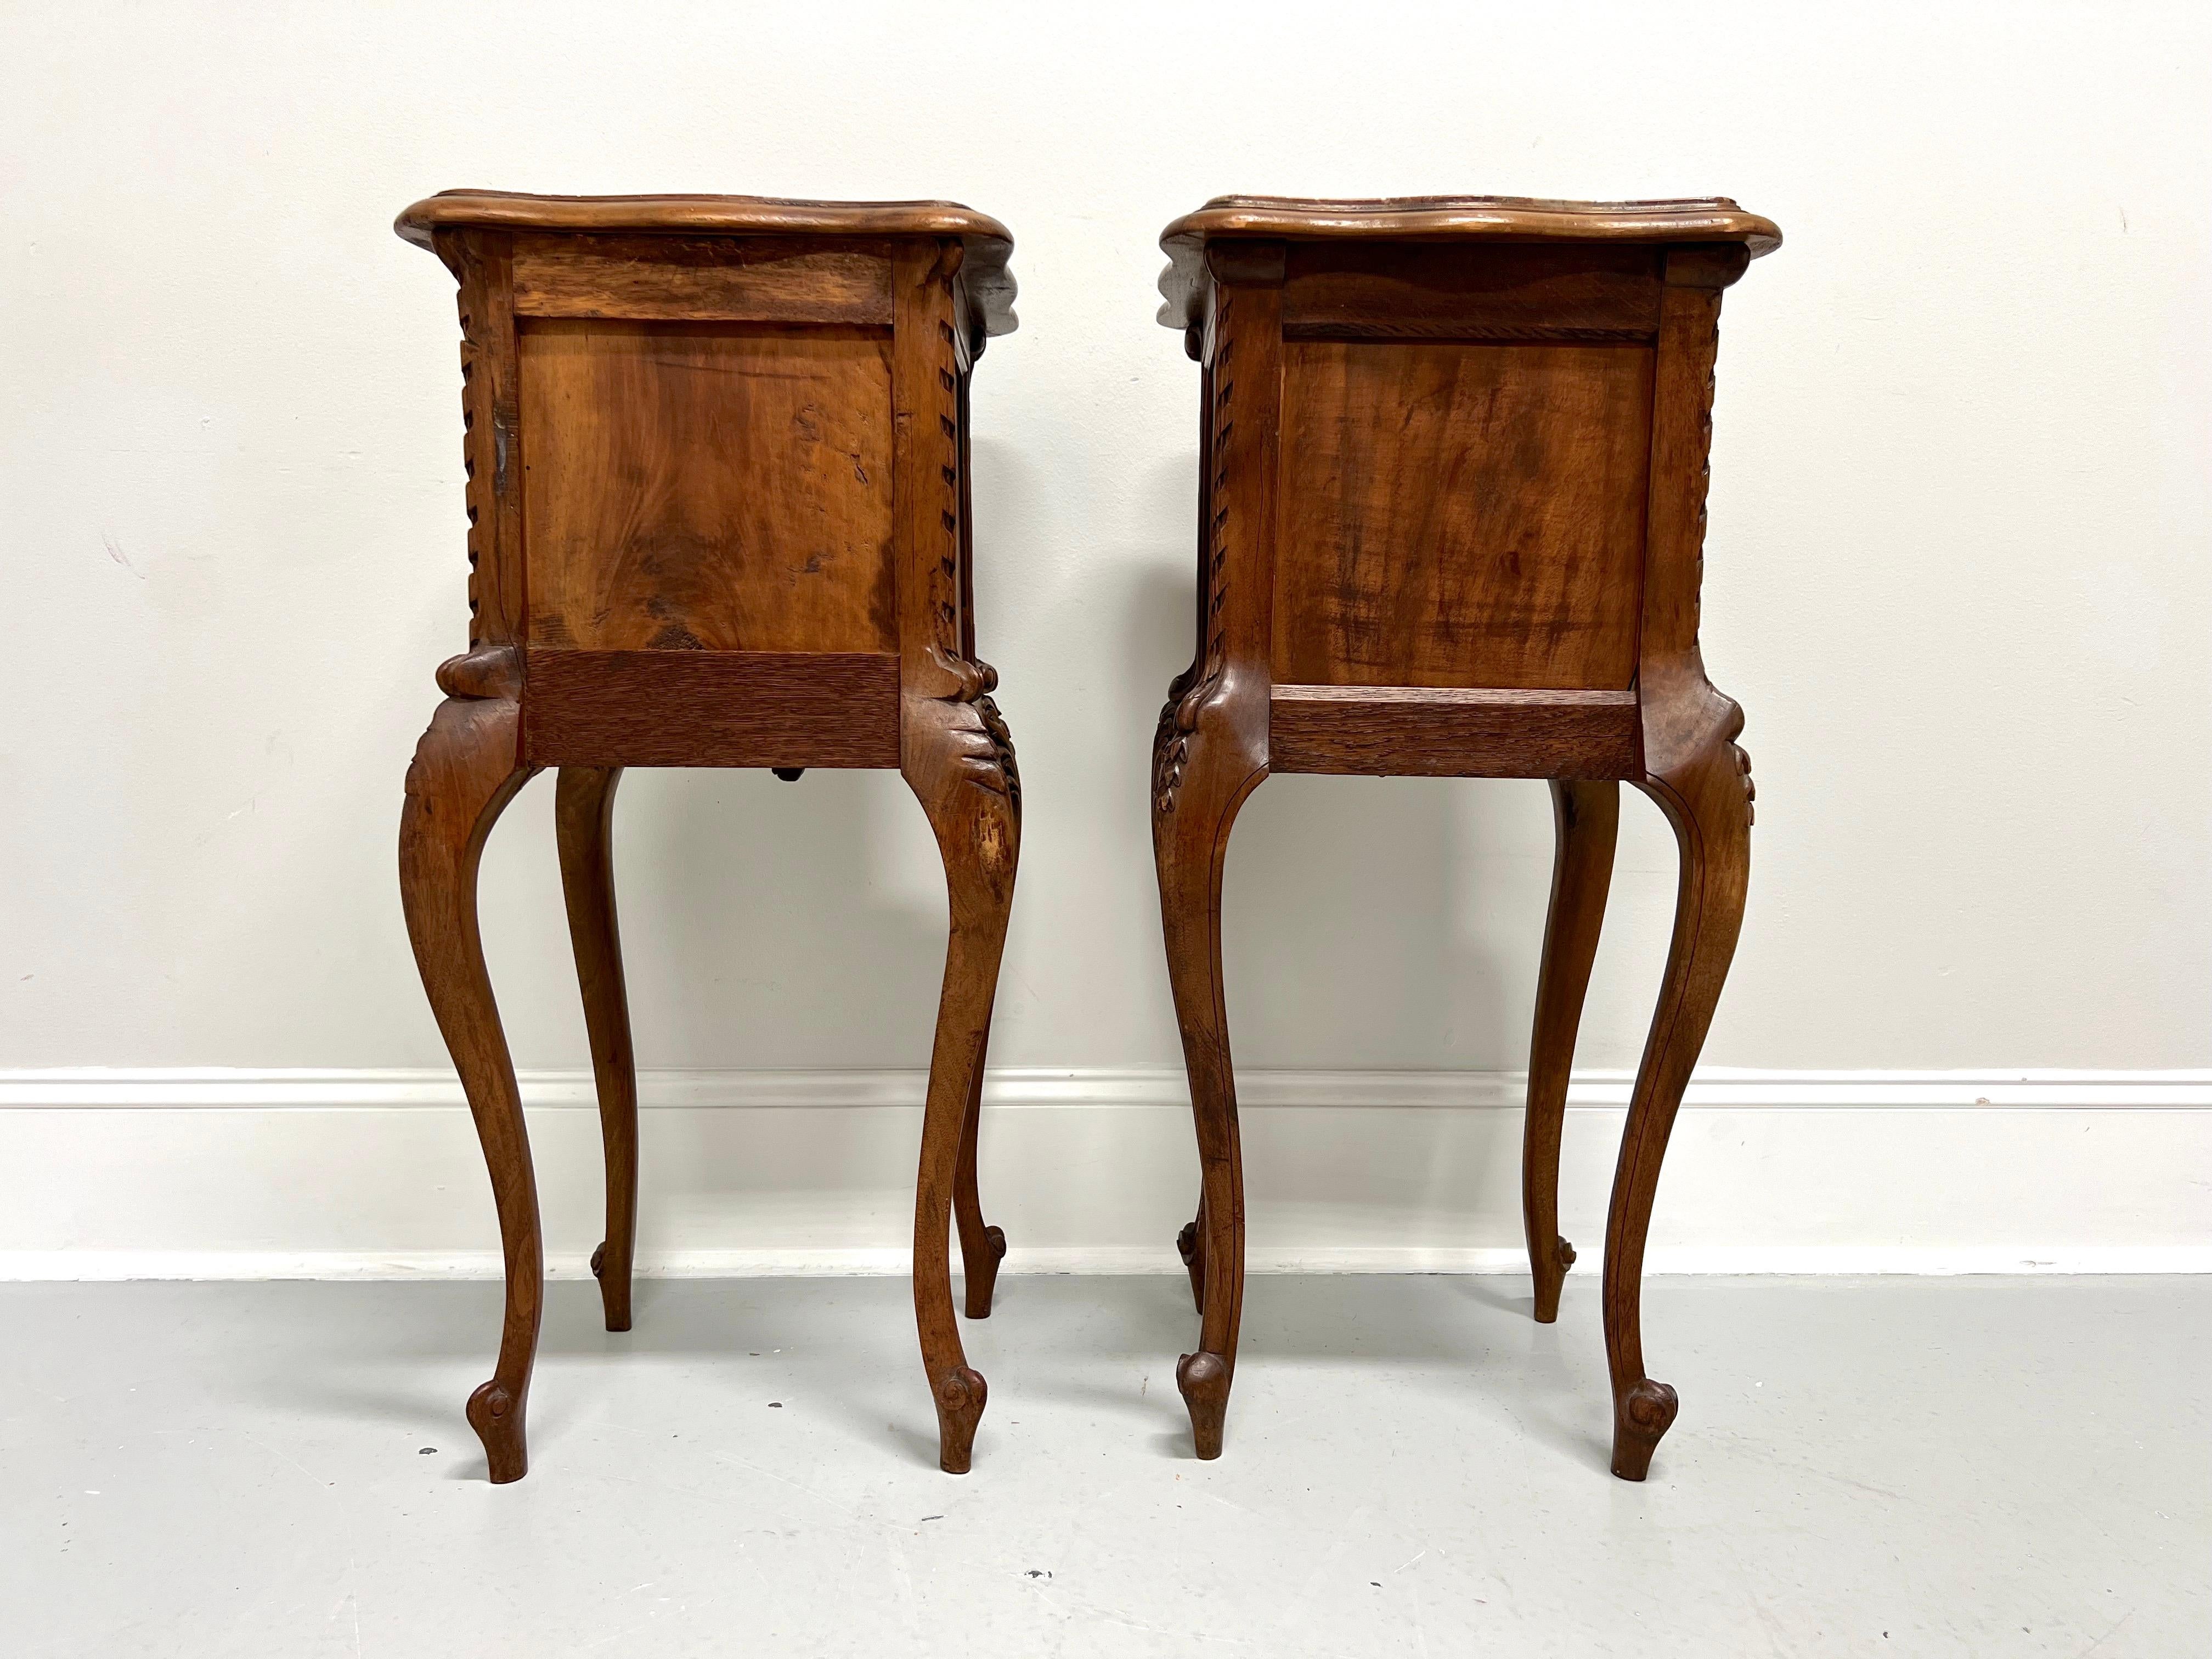 Brass Antique Carved Chestnut French Country Louis XV Commodes / Nightstands - Pair